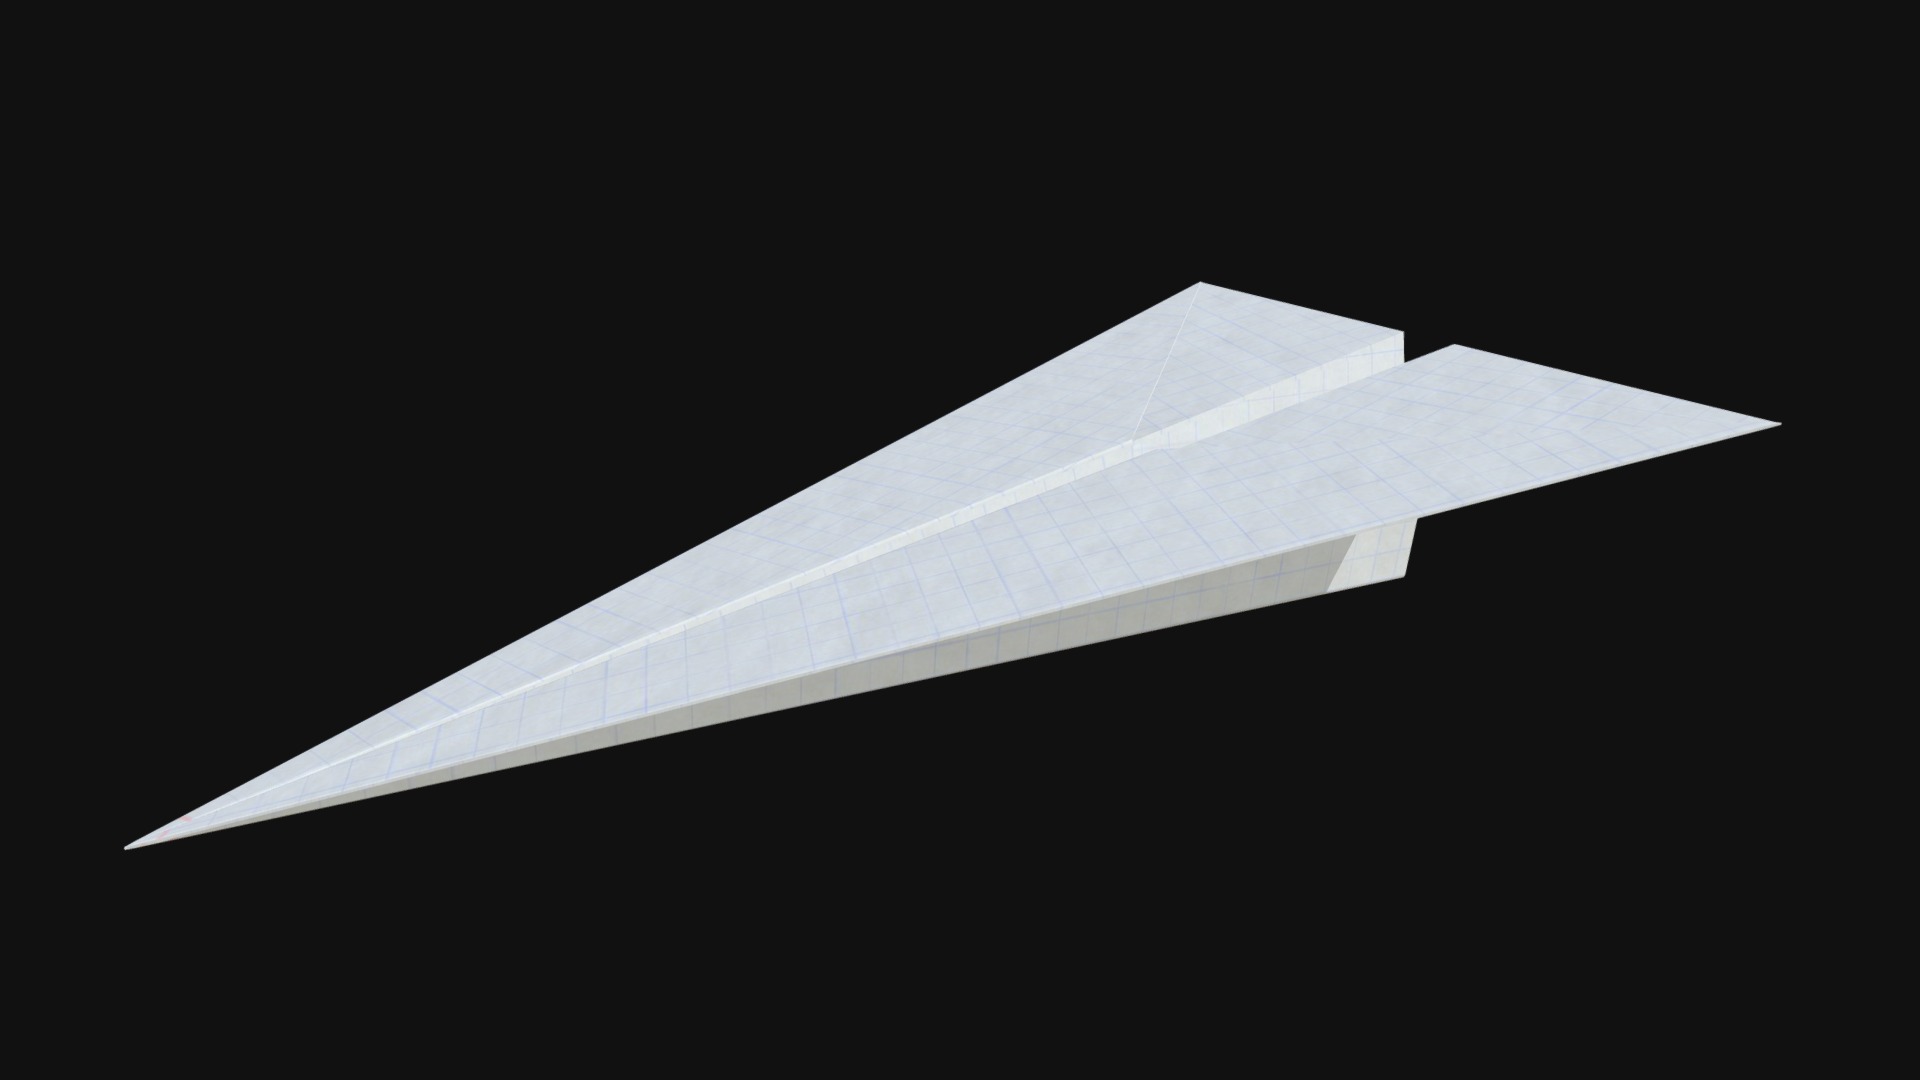 3D model Paper plane 1 - This is a 3D model of the Paper plane 1. The 3D model is about a white triangle with a black background.